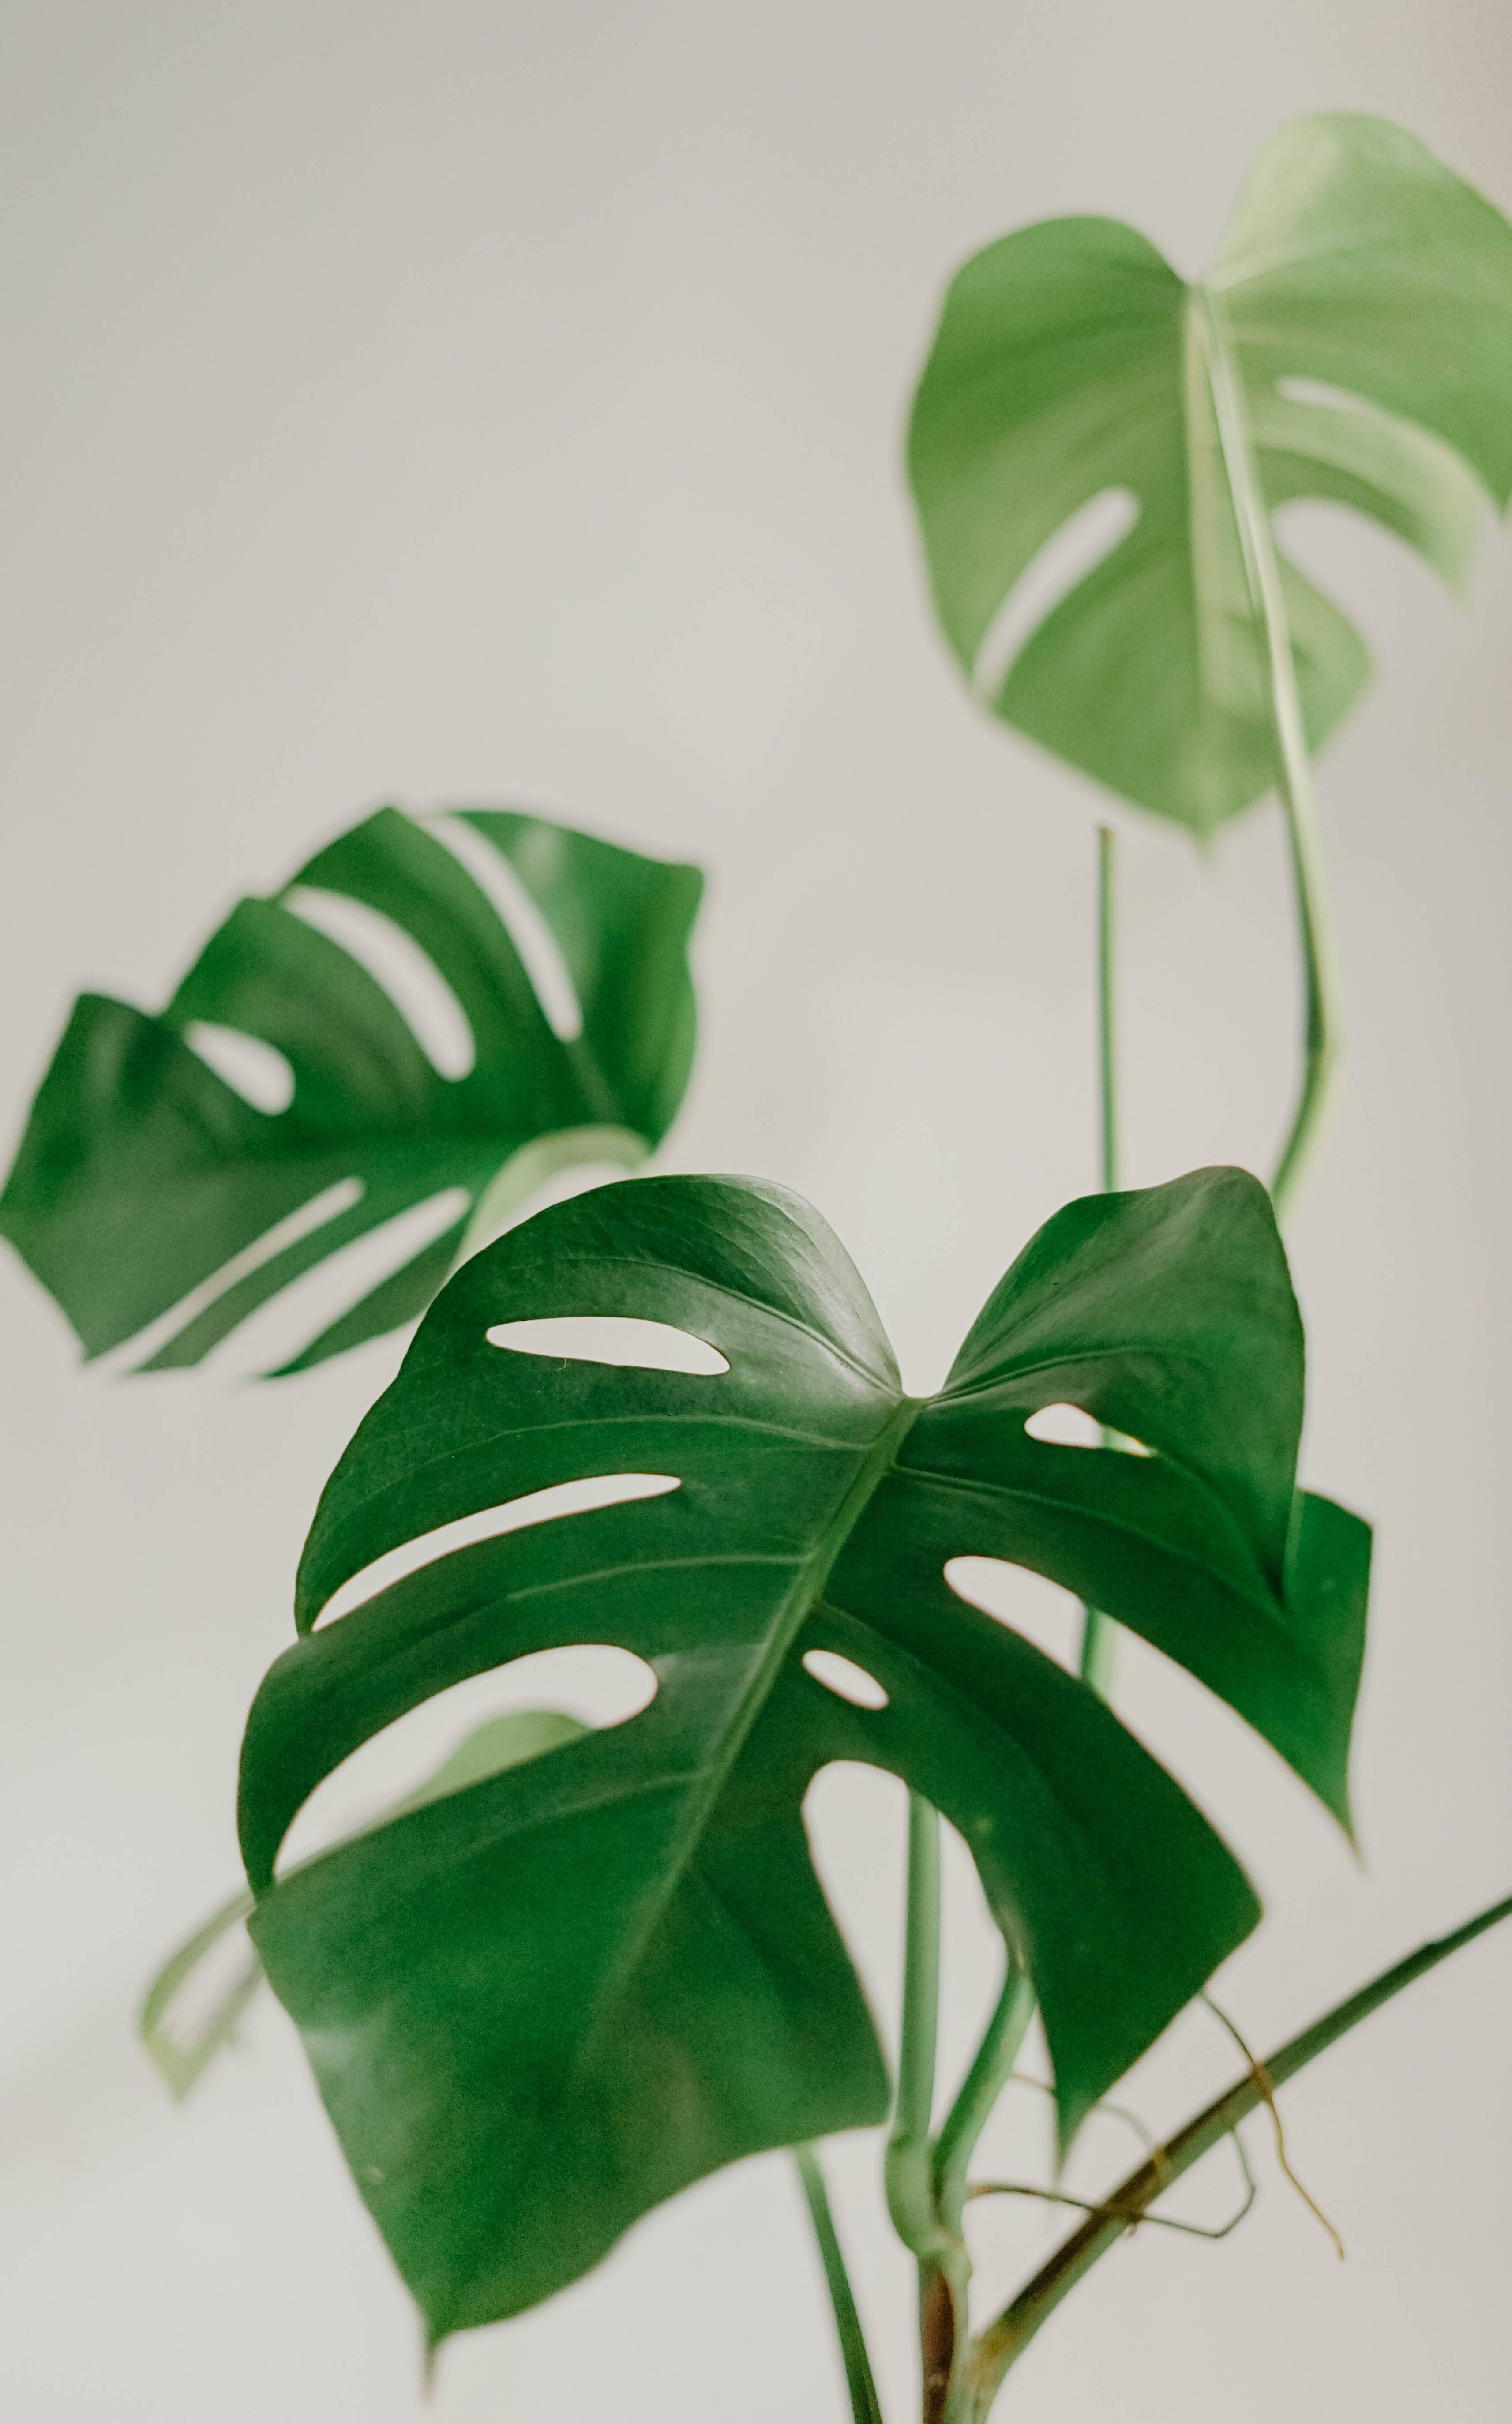 A large green leafy plant sitting in front of white background - Monstera